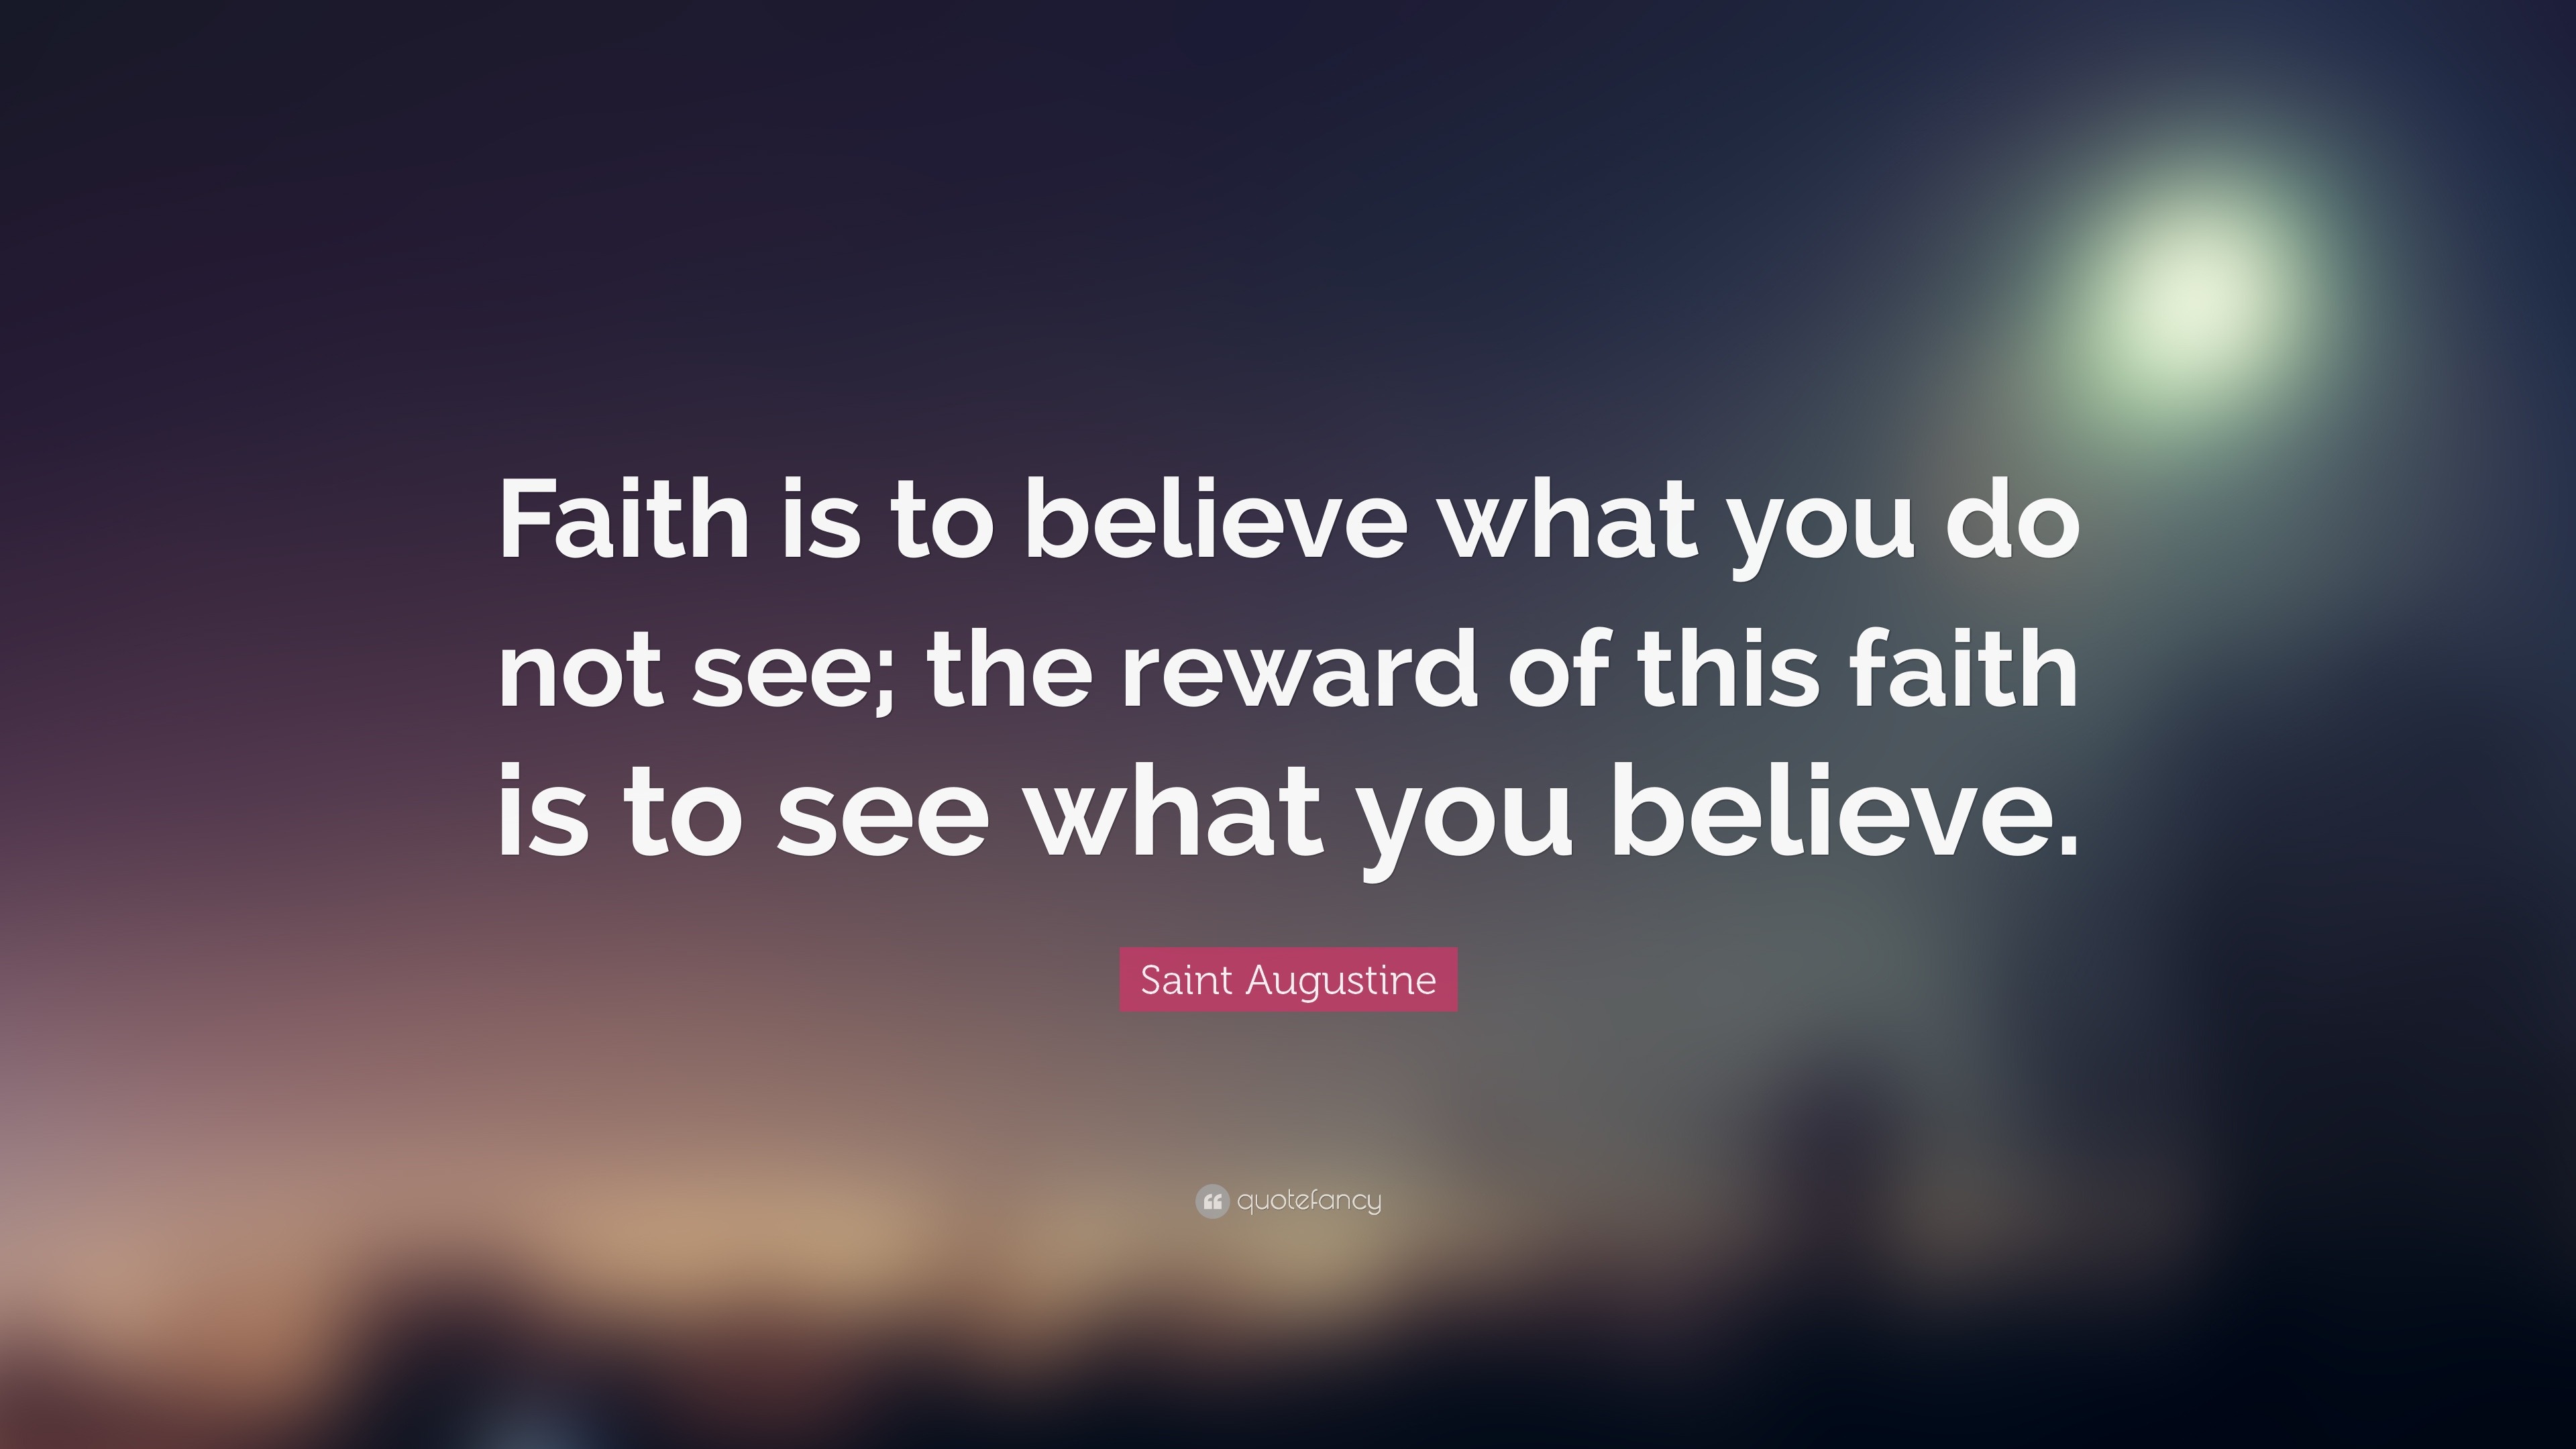 Saint Augustine - Faith is to believe what you do not see;